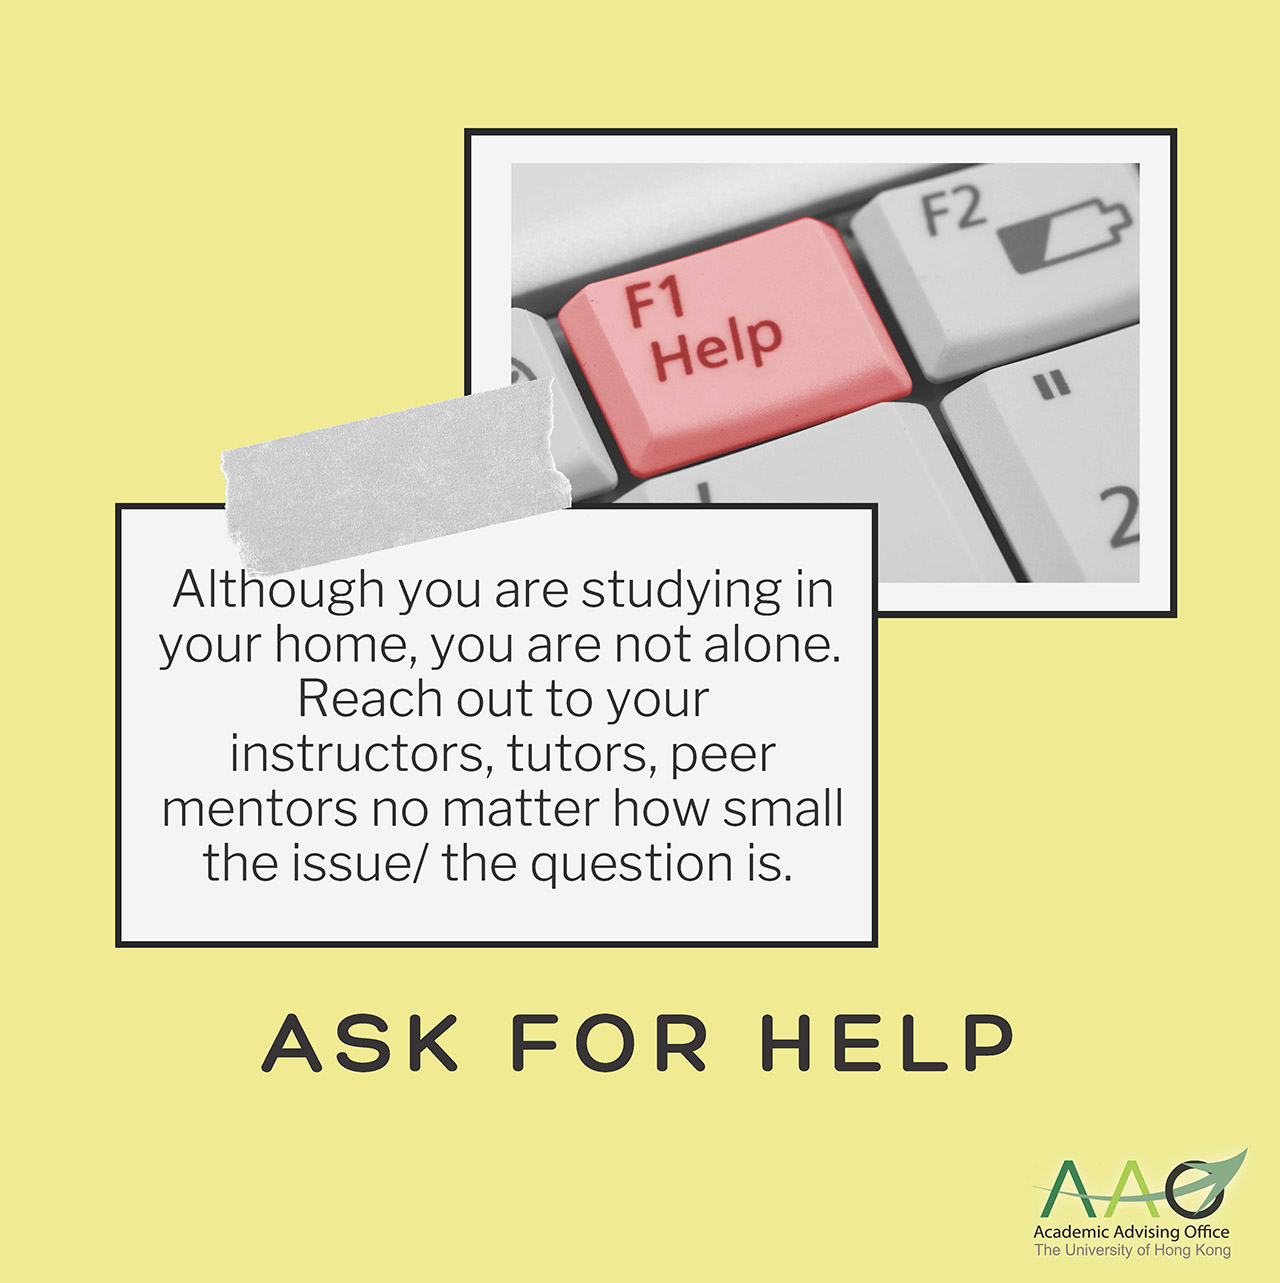 Ask for help: Although you are studying in your home, you are not alone. Reach out to your instructors, tutors, peer mentors no matter how small the issue / the question.